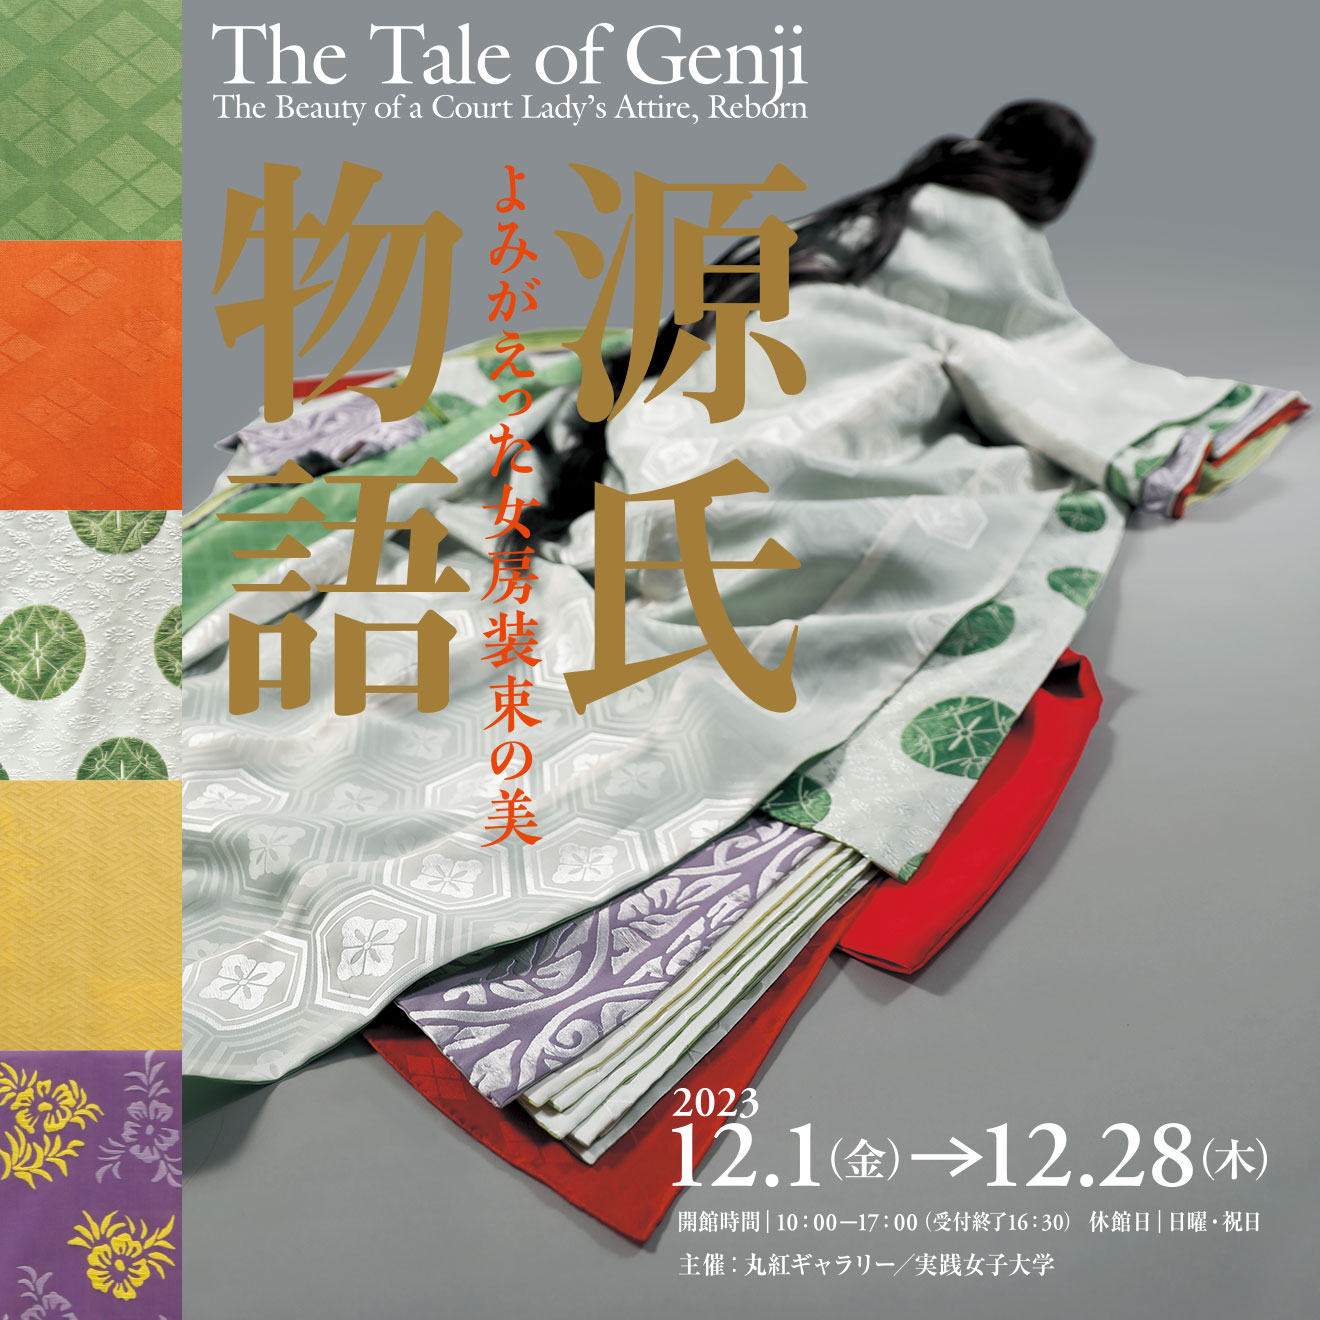 The Tale of Genji The Beauty of a Court Lady's Attire, Reborn